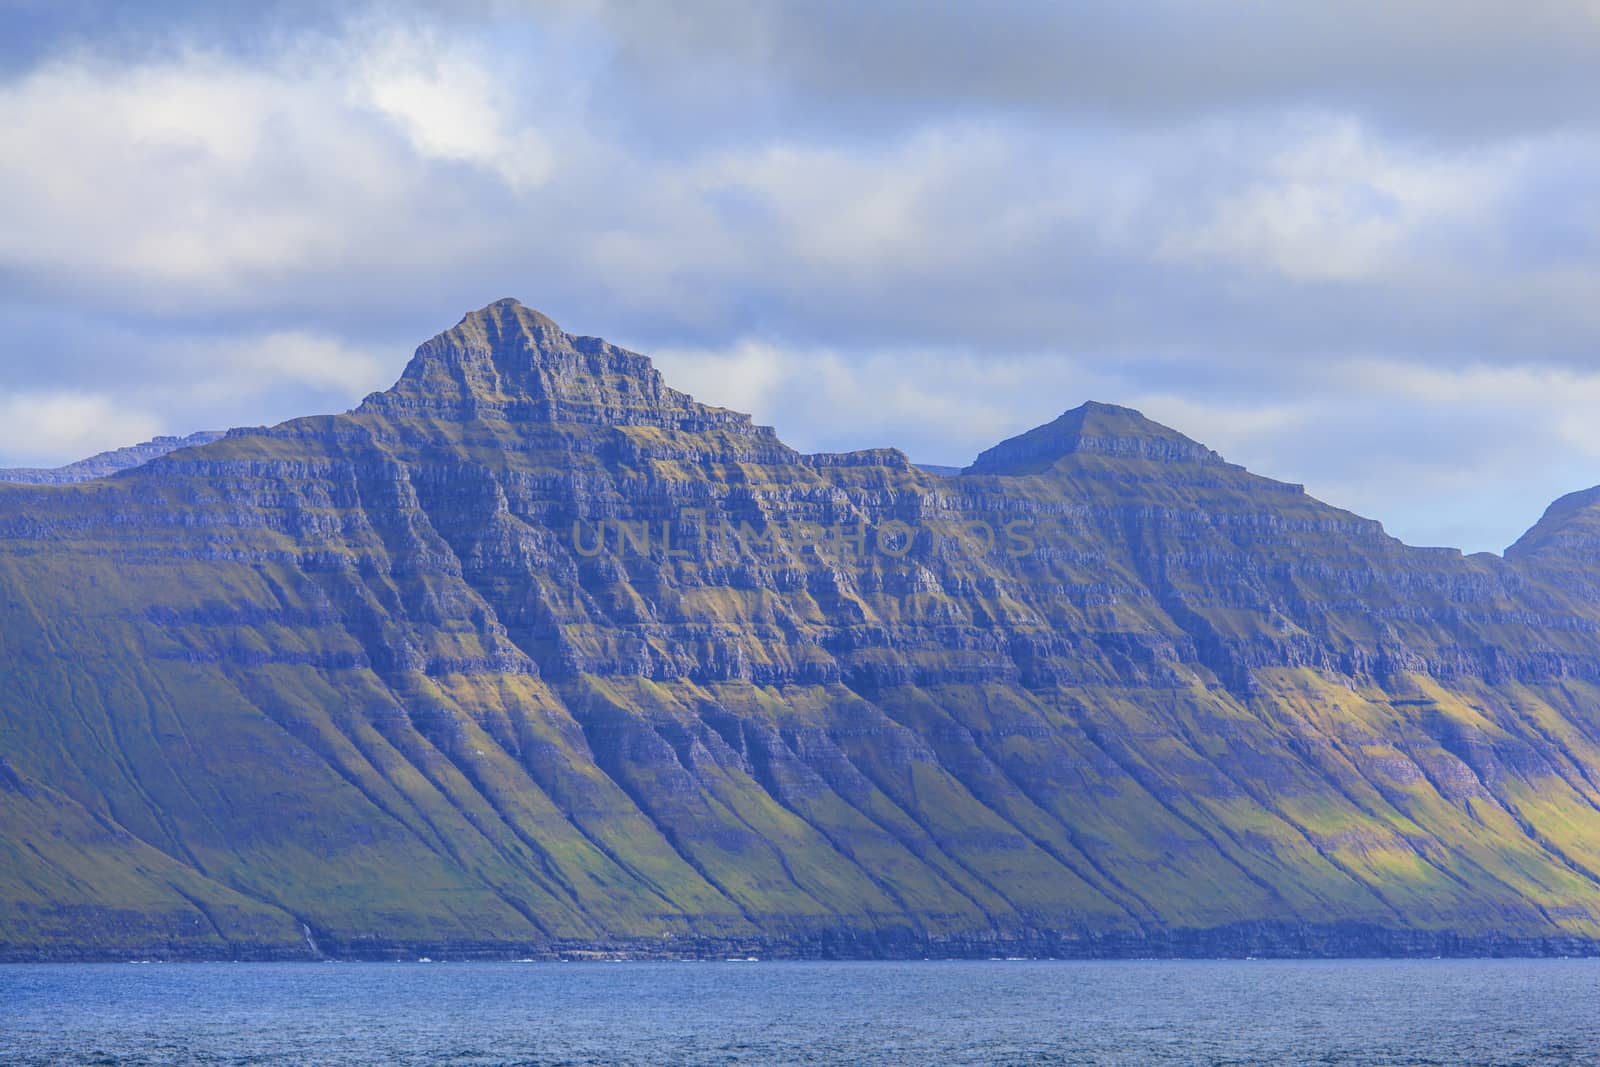 Views of Kalsoy island located across the fjord from Gjogv